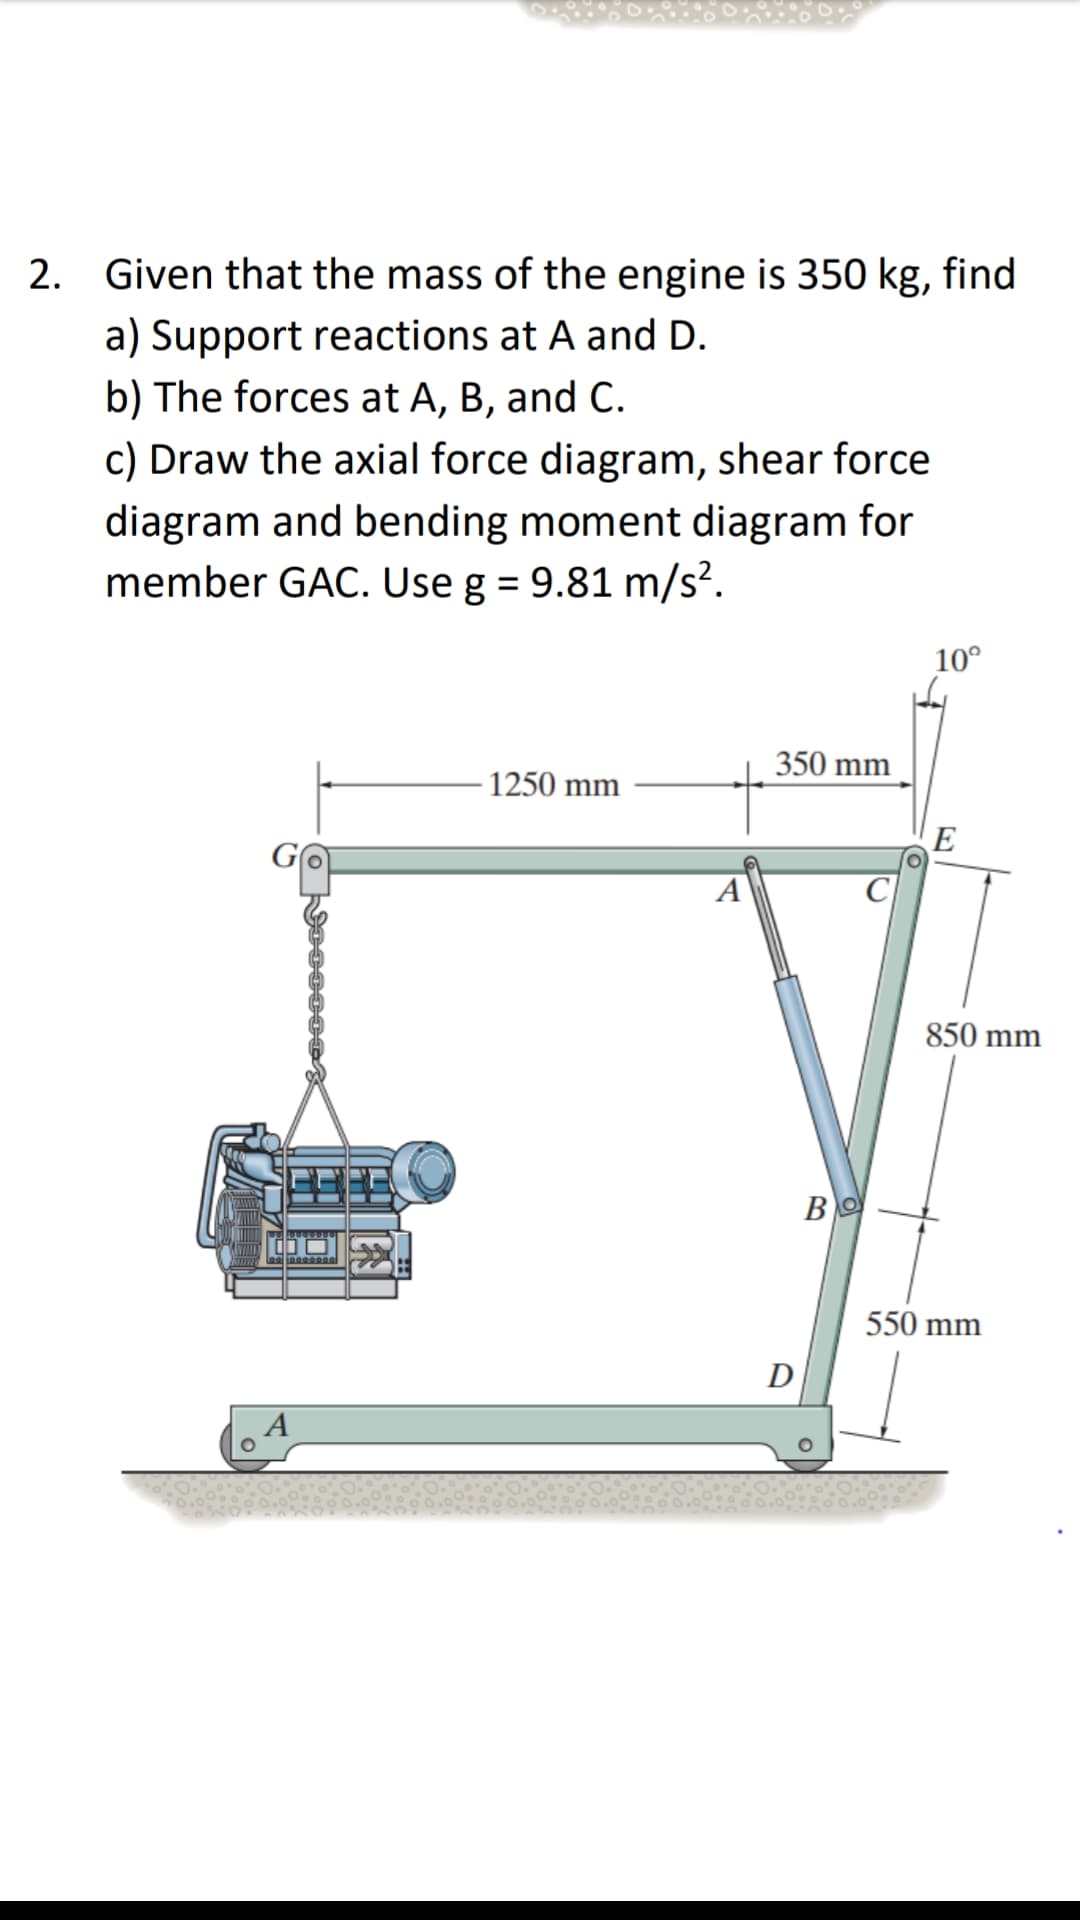 2. Given that the mass of the engine is 350 kg, find
a) Support reactions at A and D.
b) The forces at A, B, and C.
c) Draw the axial force diagram, shear force
diagram and bending moment diagram for
member GAC. Use g = 9.81 m/s².
10°
350 mm
- 1250 mm
E
A
C
850 mm
550 mm
D
A
